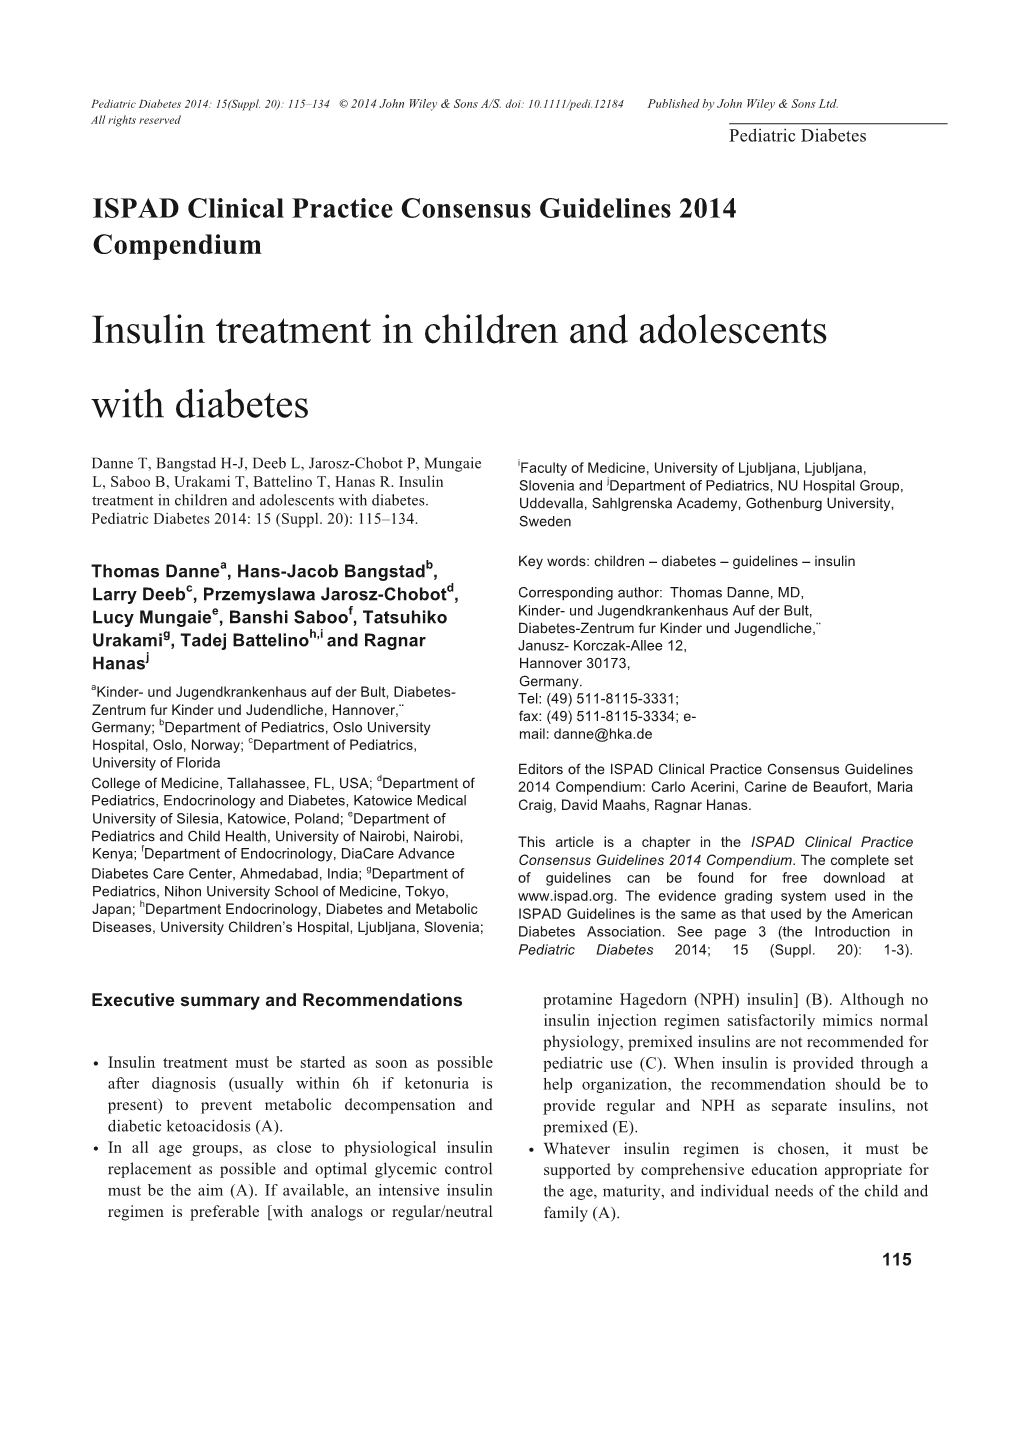 Insulin Treatment in Children and Adolescents with Diabetes